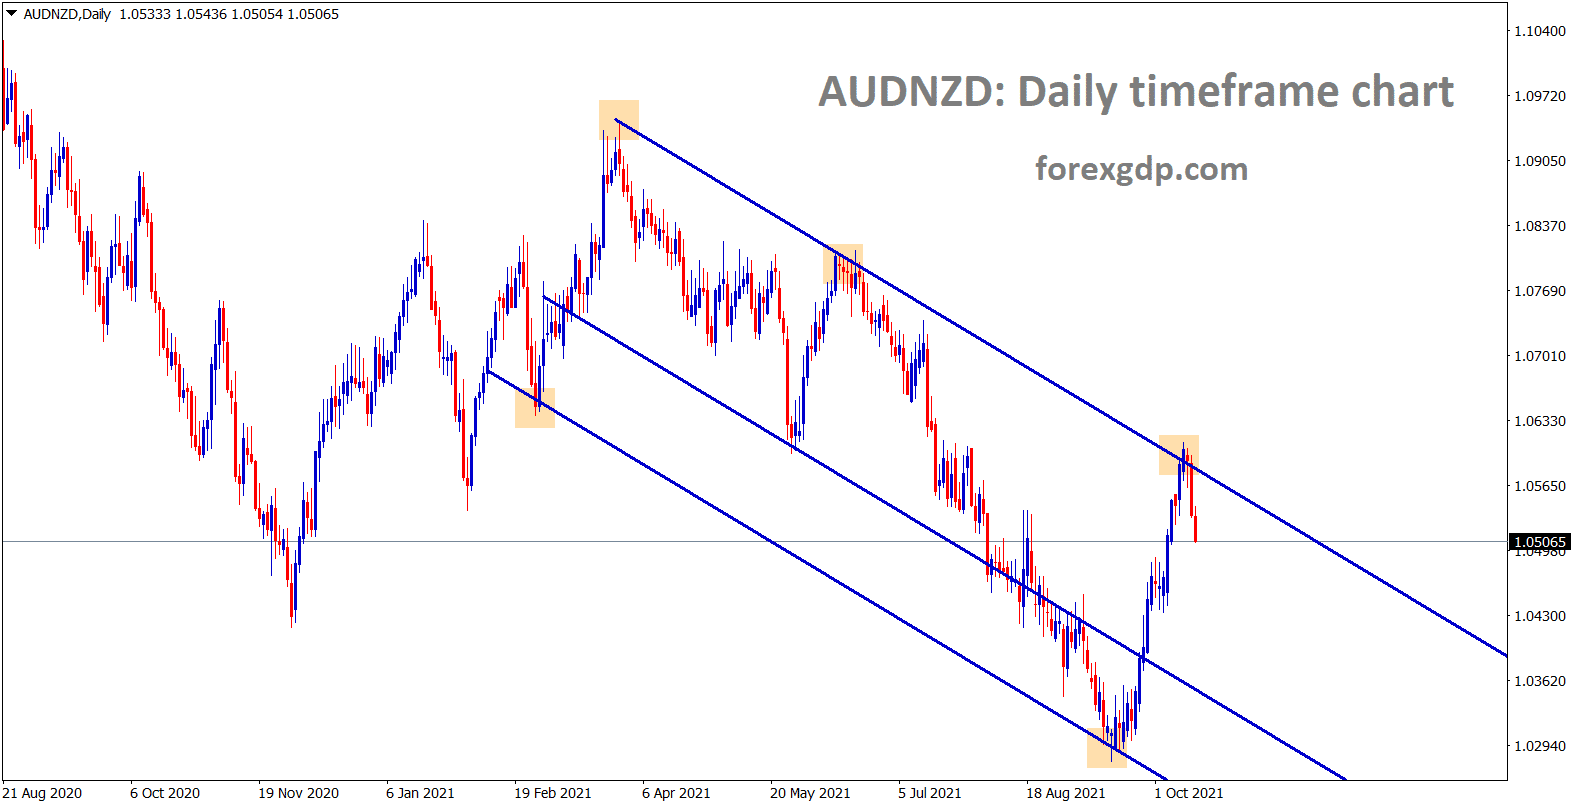 AUDNZD is falling from the lower high area of the downtrend line